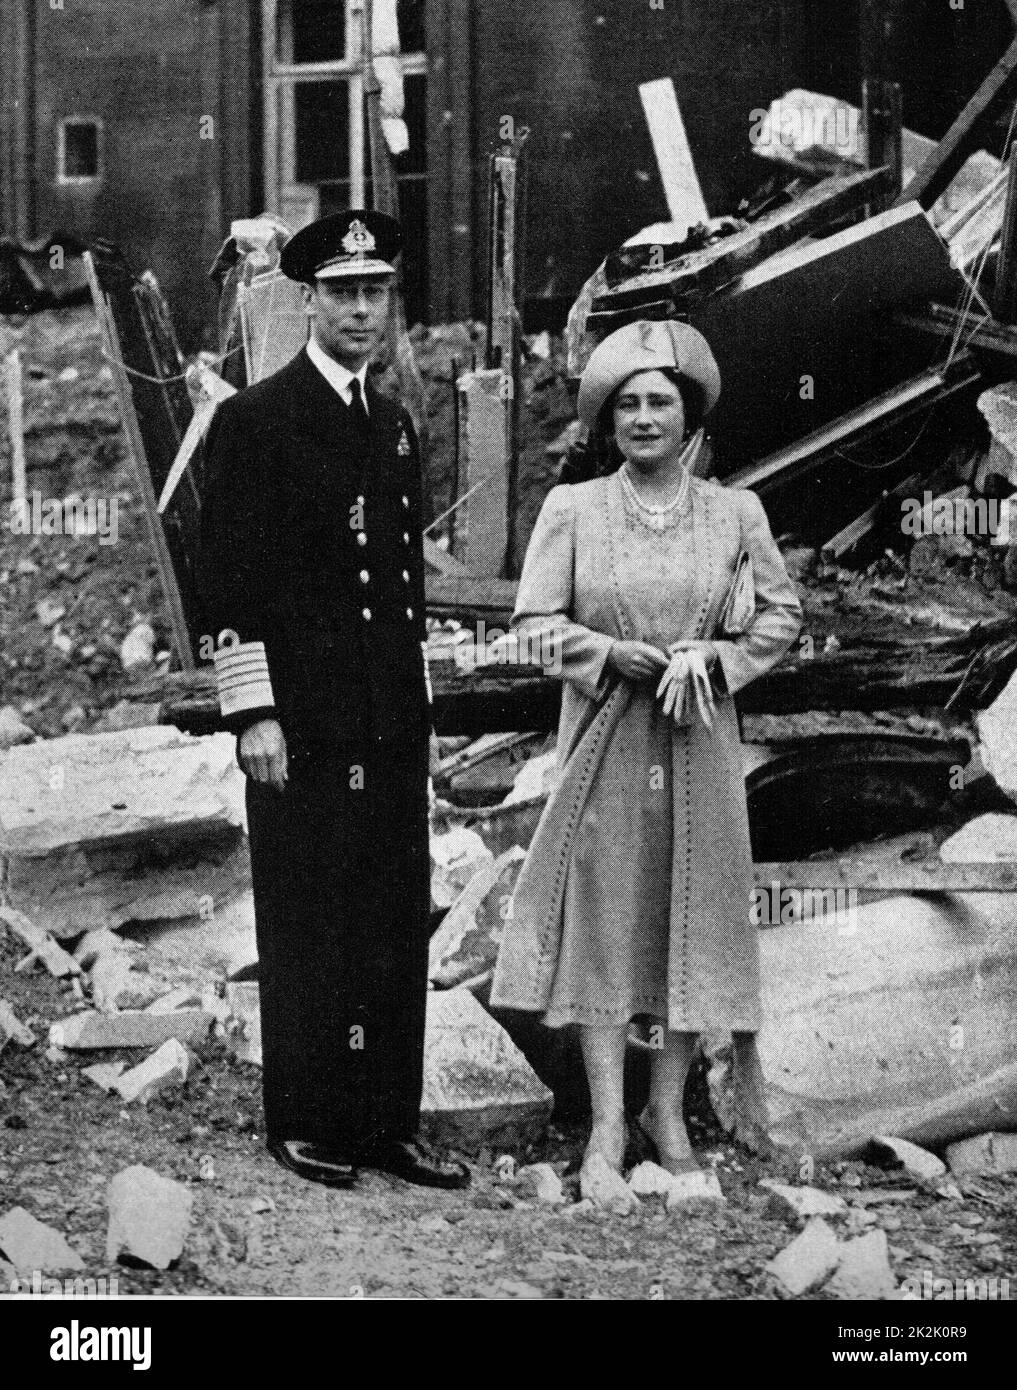 King George V and Queen Elizabeth, stand in the ruins of Buckingham Palace after an air raid in World War II Stock Photo